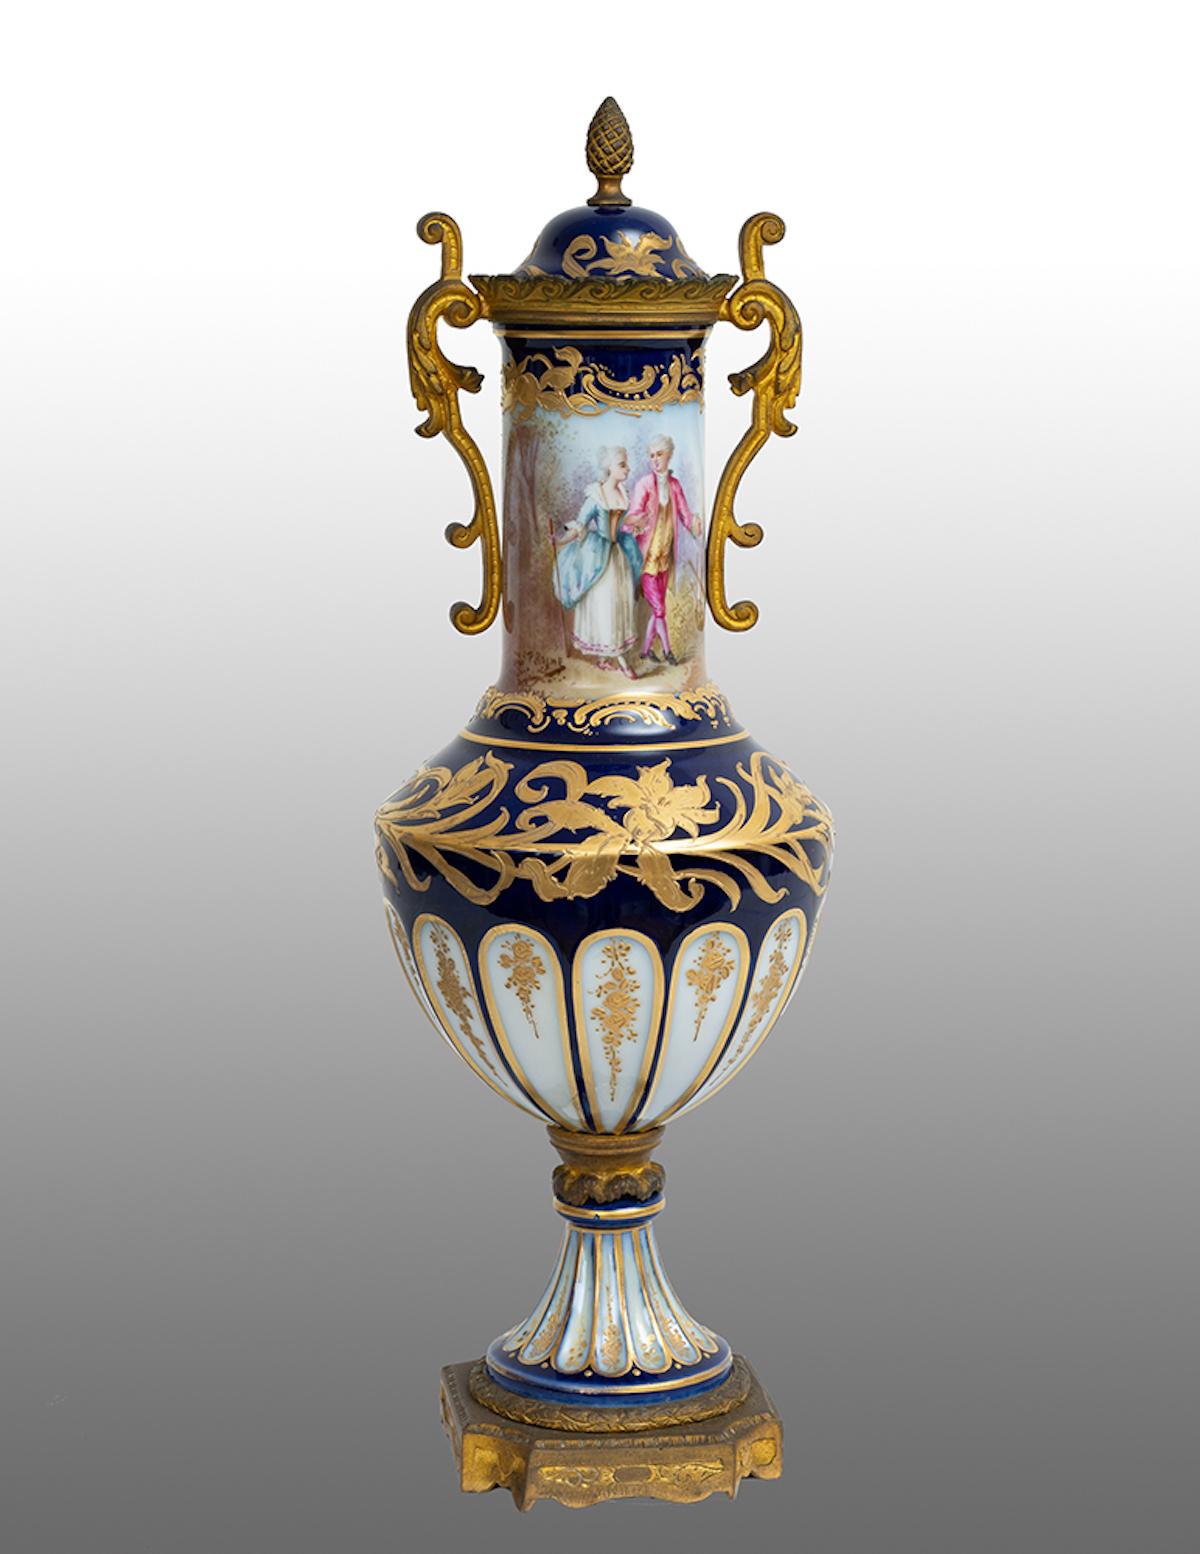 Antique French Napoleon III porcelain vase from Sevres 19th century - Art by Unknown